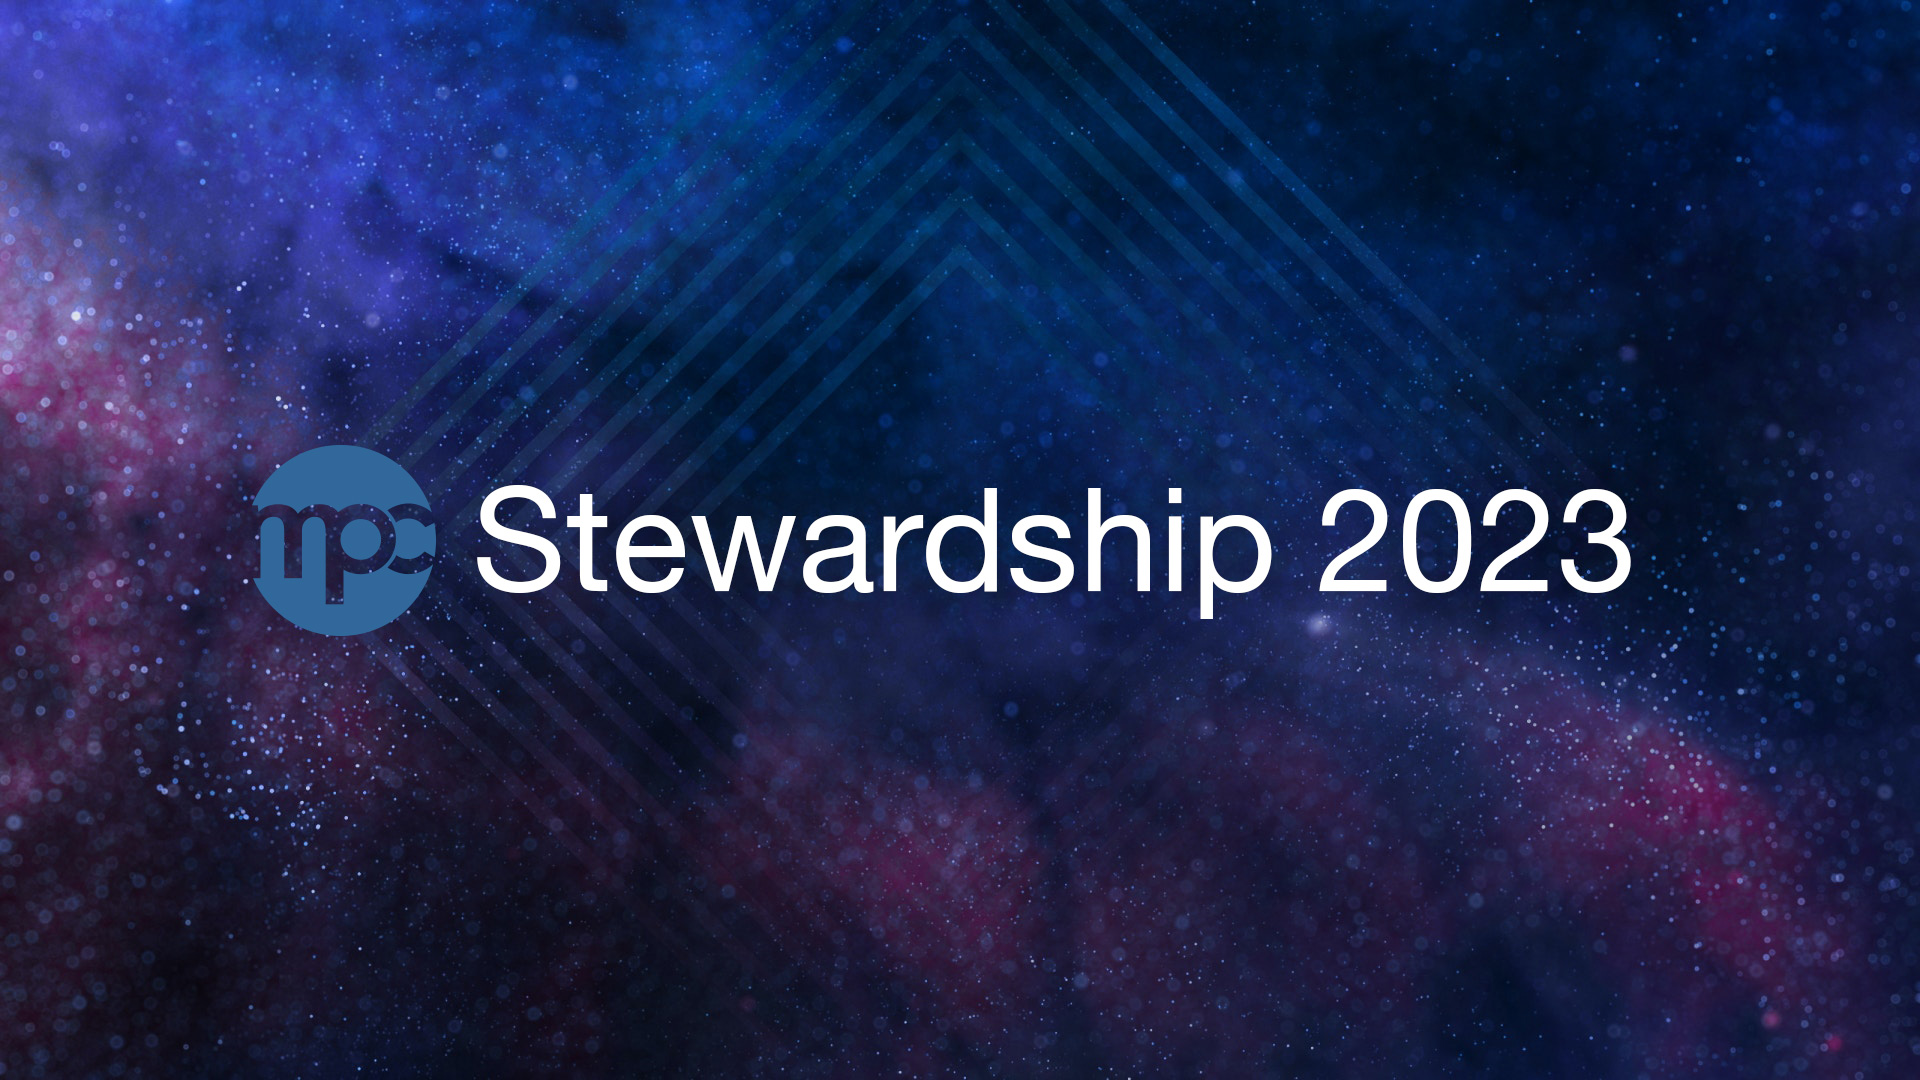 Stewardship 2023 at MPC

Use the form on this link to confidentially submit your pledge online.
